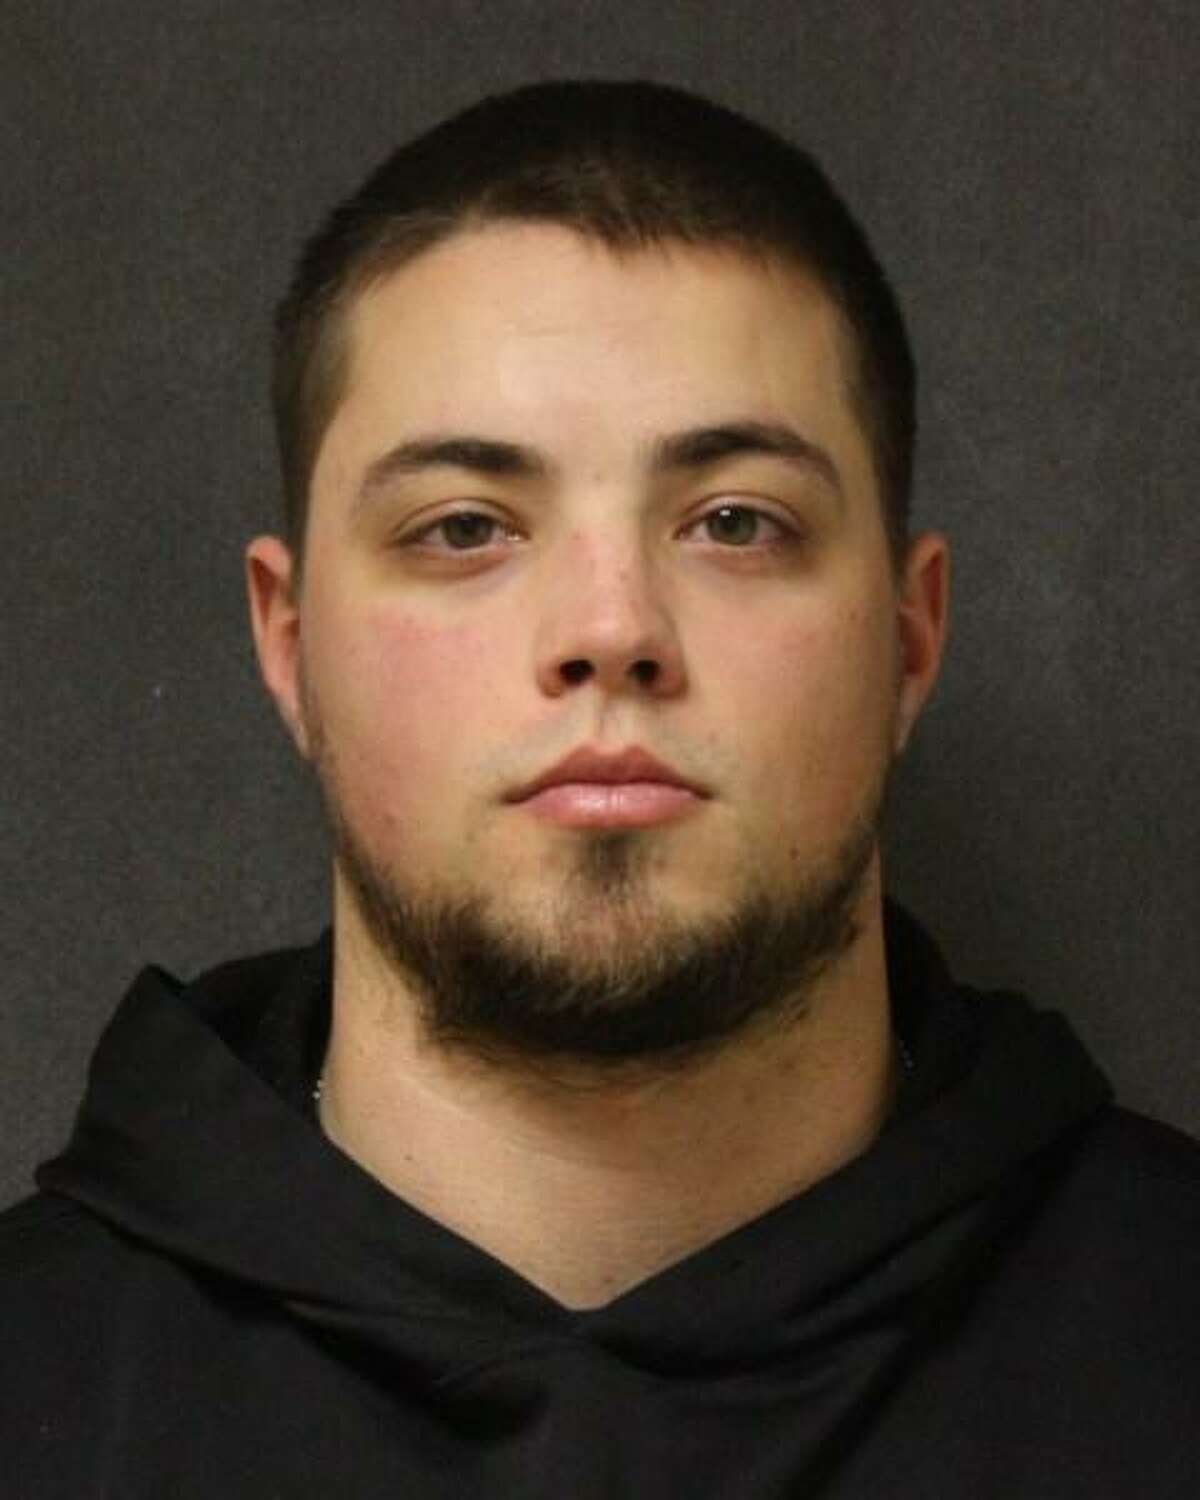 Ansonia police have charged Zachary Mercer, 24, of Hamden in connection with the fatal Sept. 23, 2018 downtown crash that killed 78-year-old Garrett Dalton. Mercer is free on $10,000 bond pending a Jan. 14 court appearance.